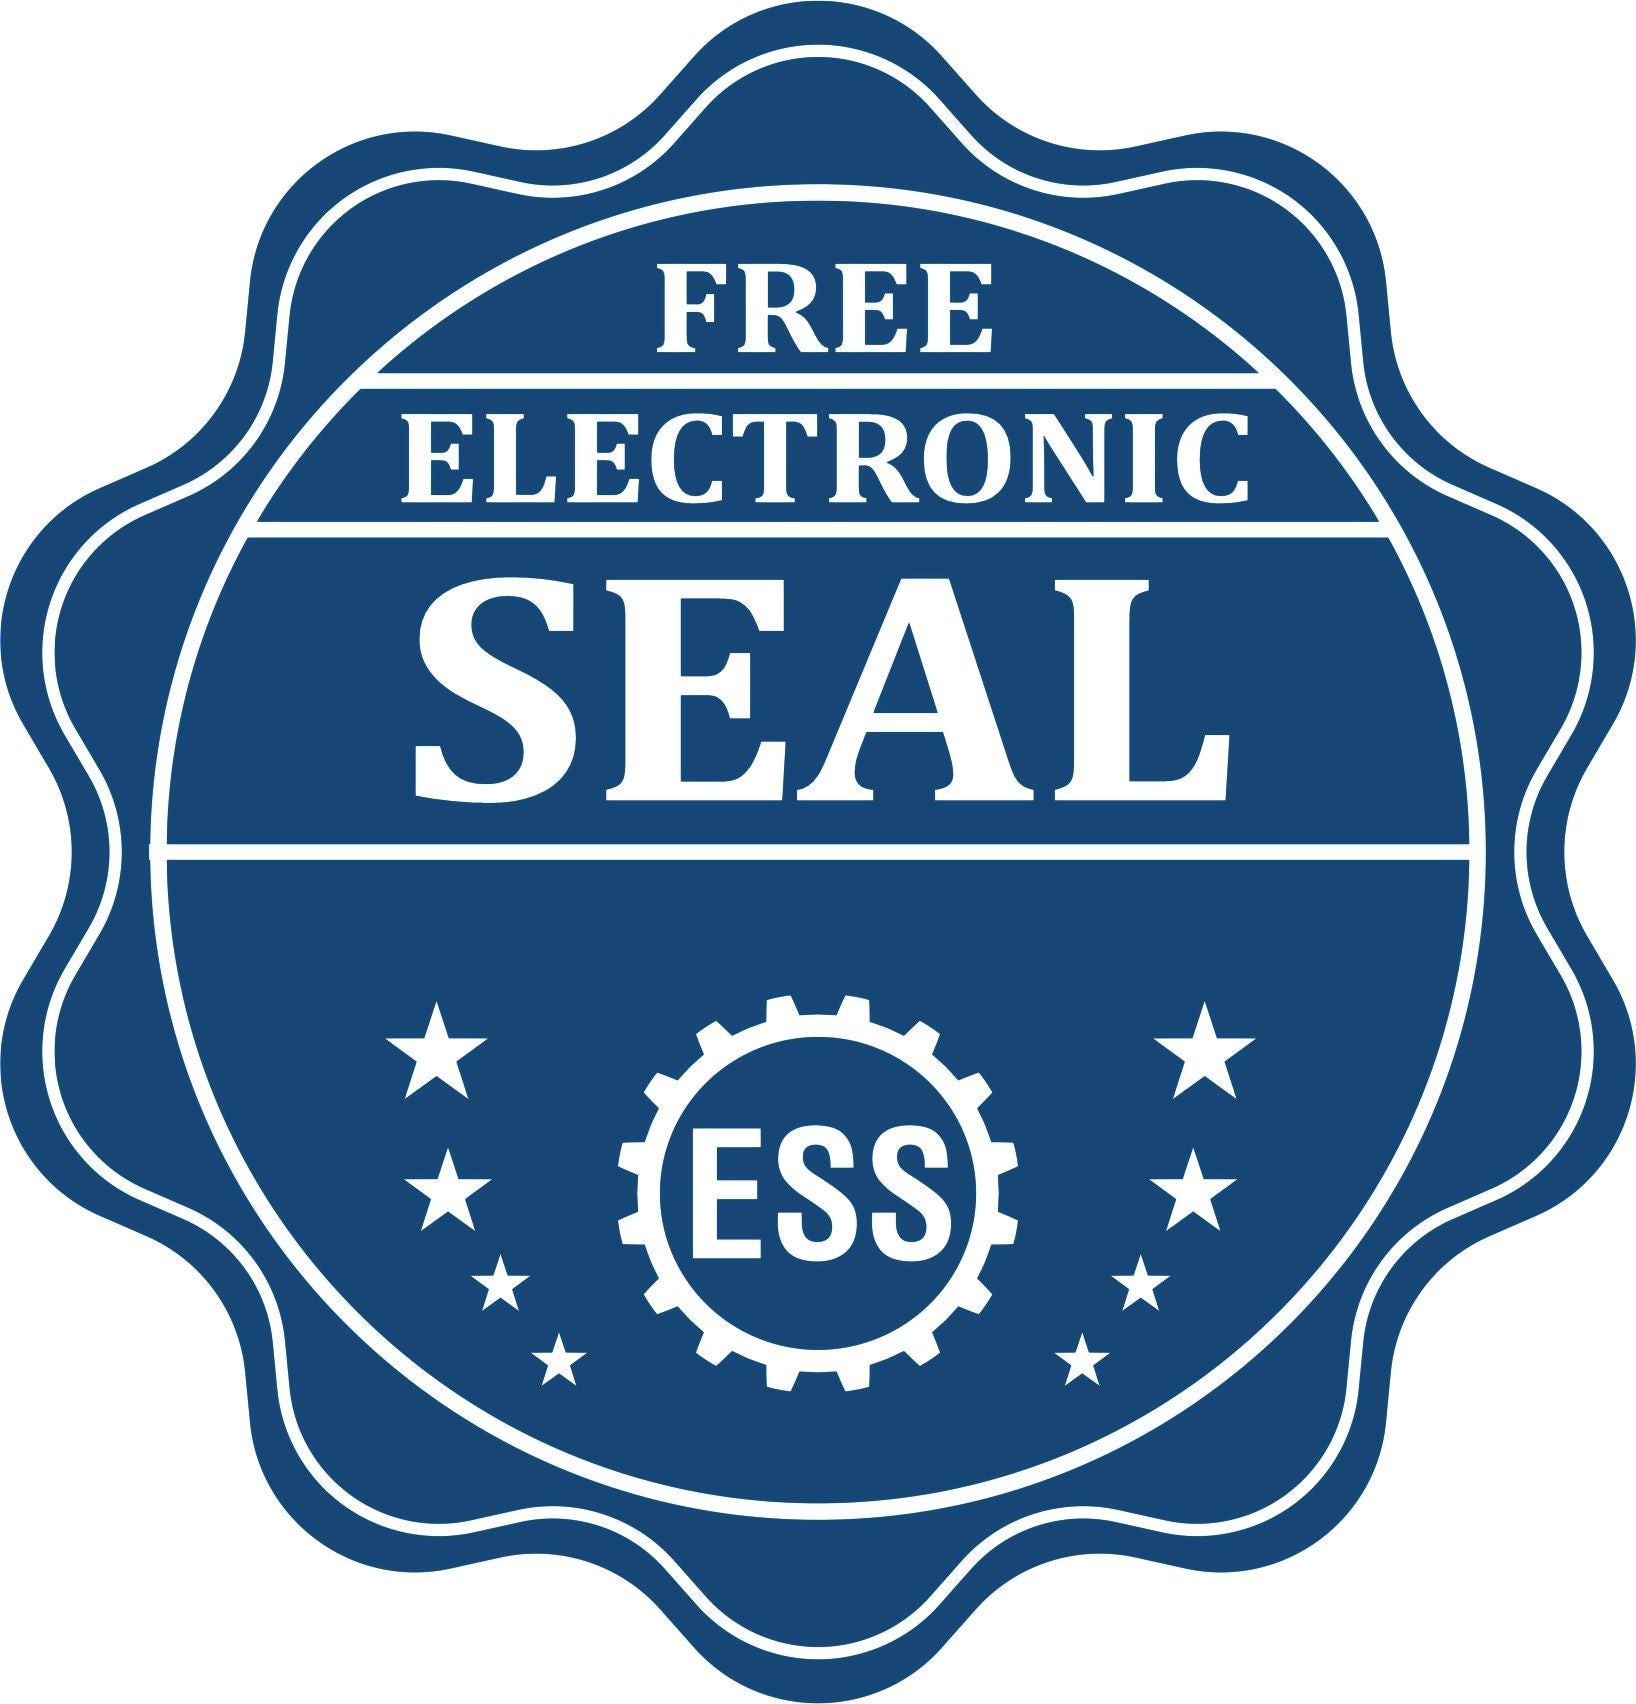 A badge showing a free electronic seal for the Heavy Duty Cast Iron Arkansas Engineer Seal Embosser with stars and the ESS gear on the emblem.